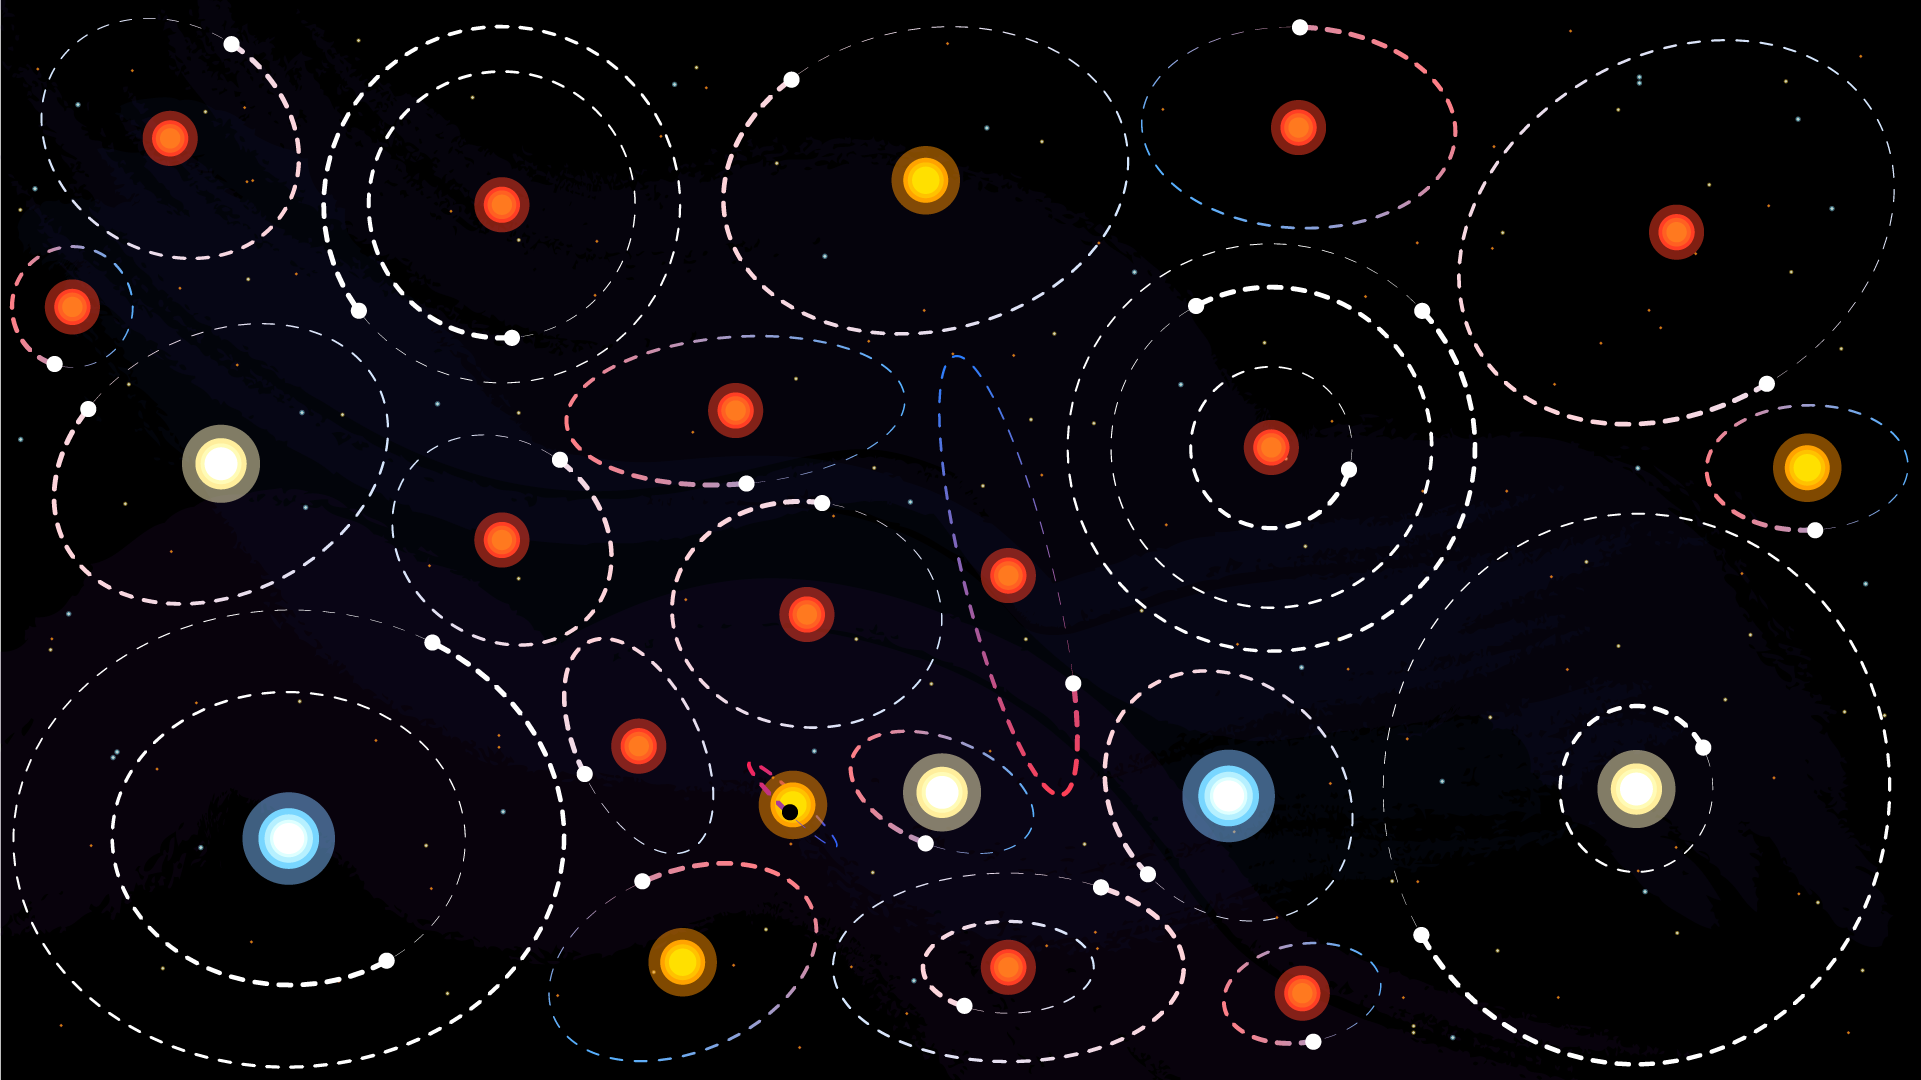 Drift Rate Graphic featuring many exo-planetary systems